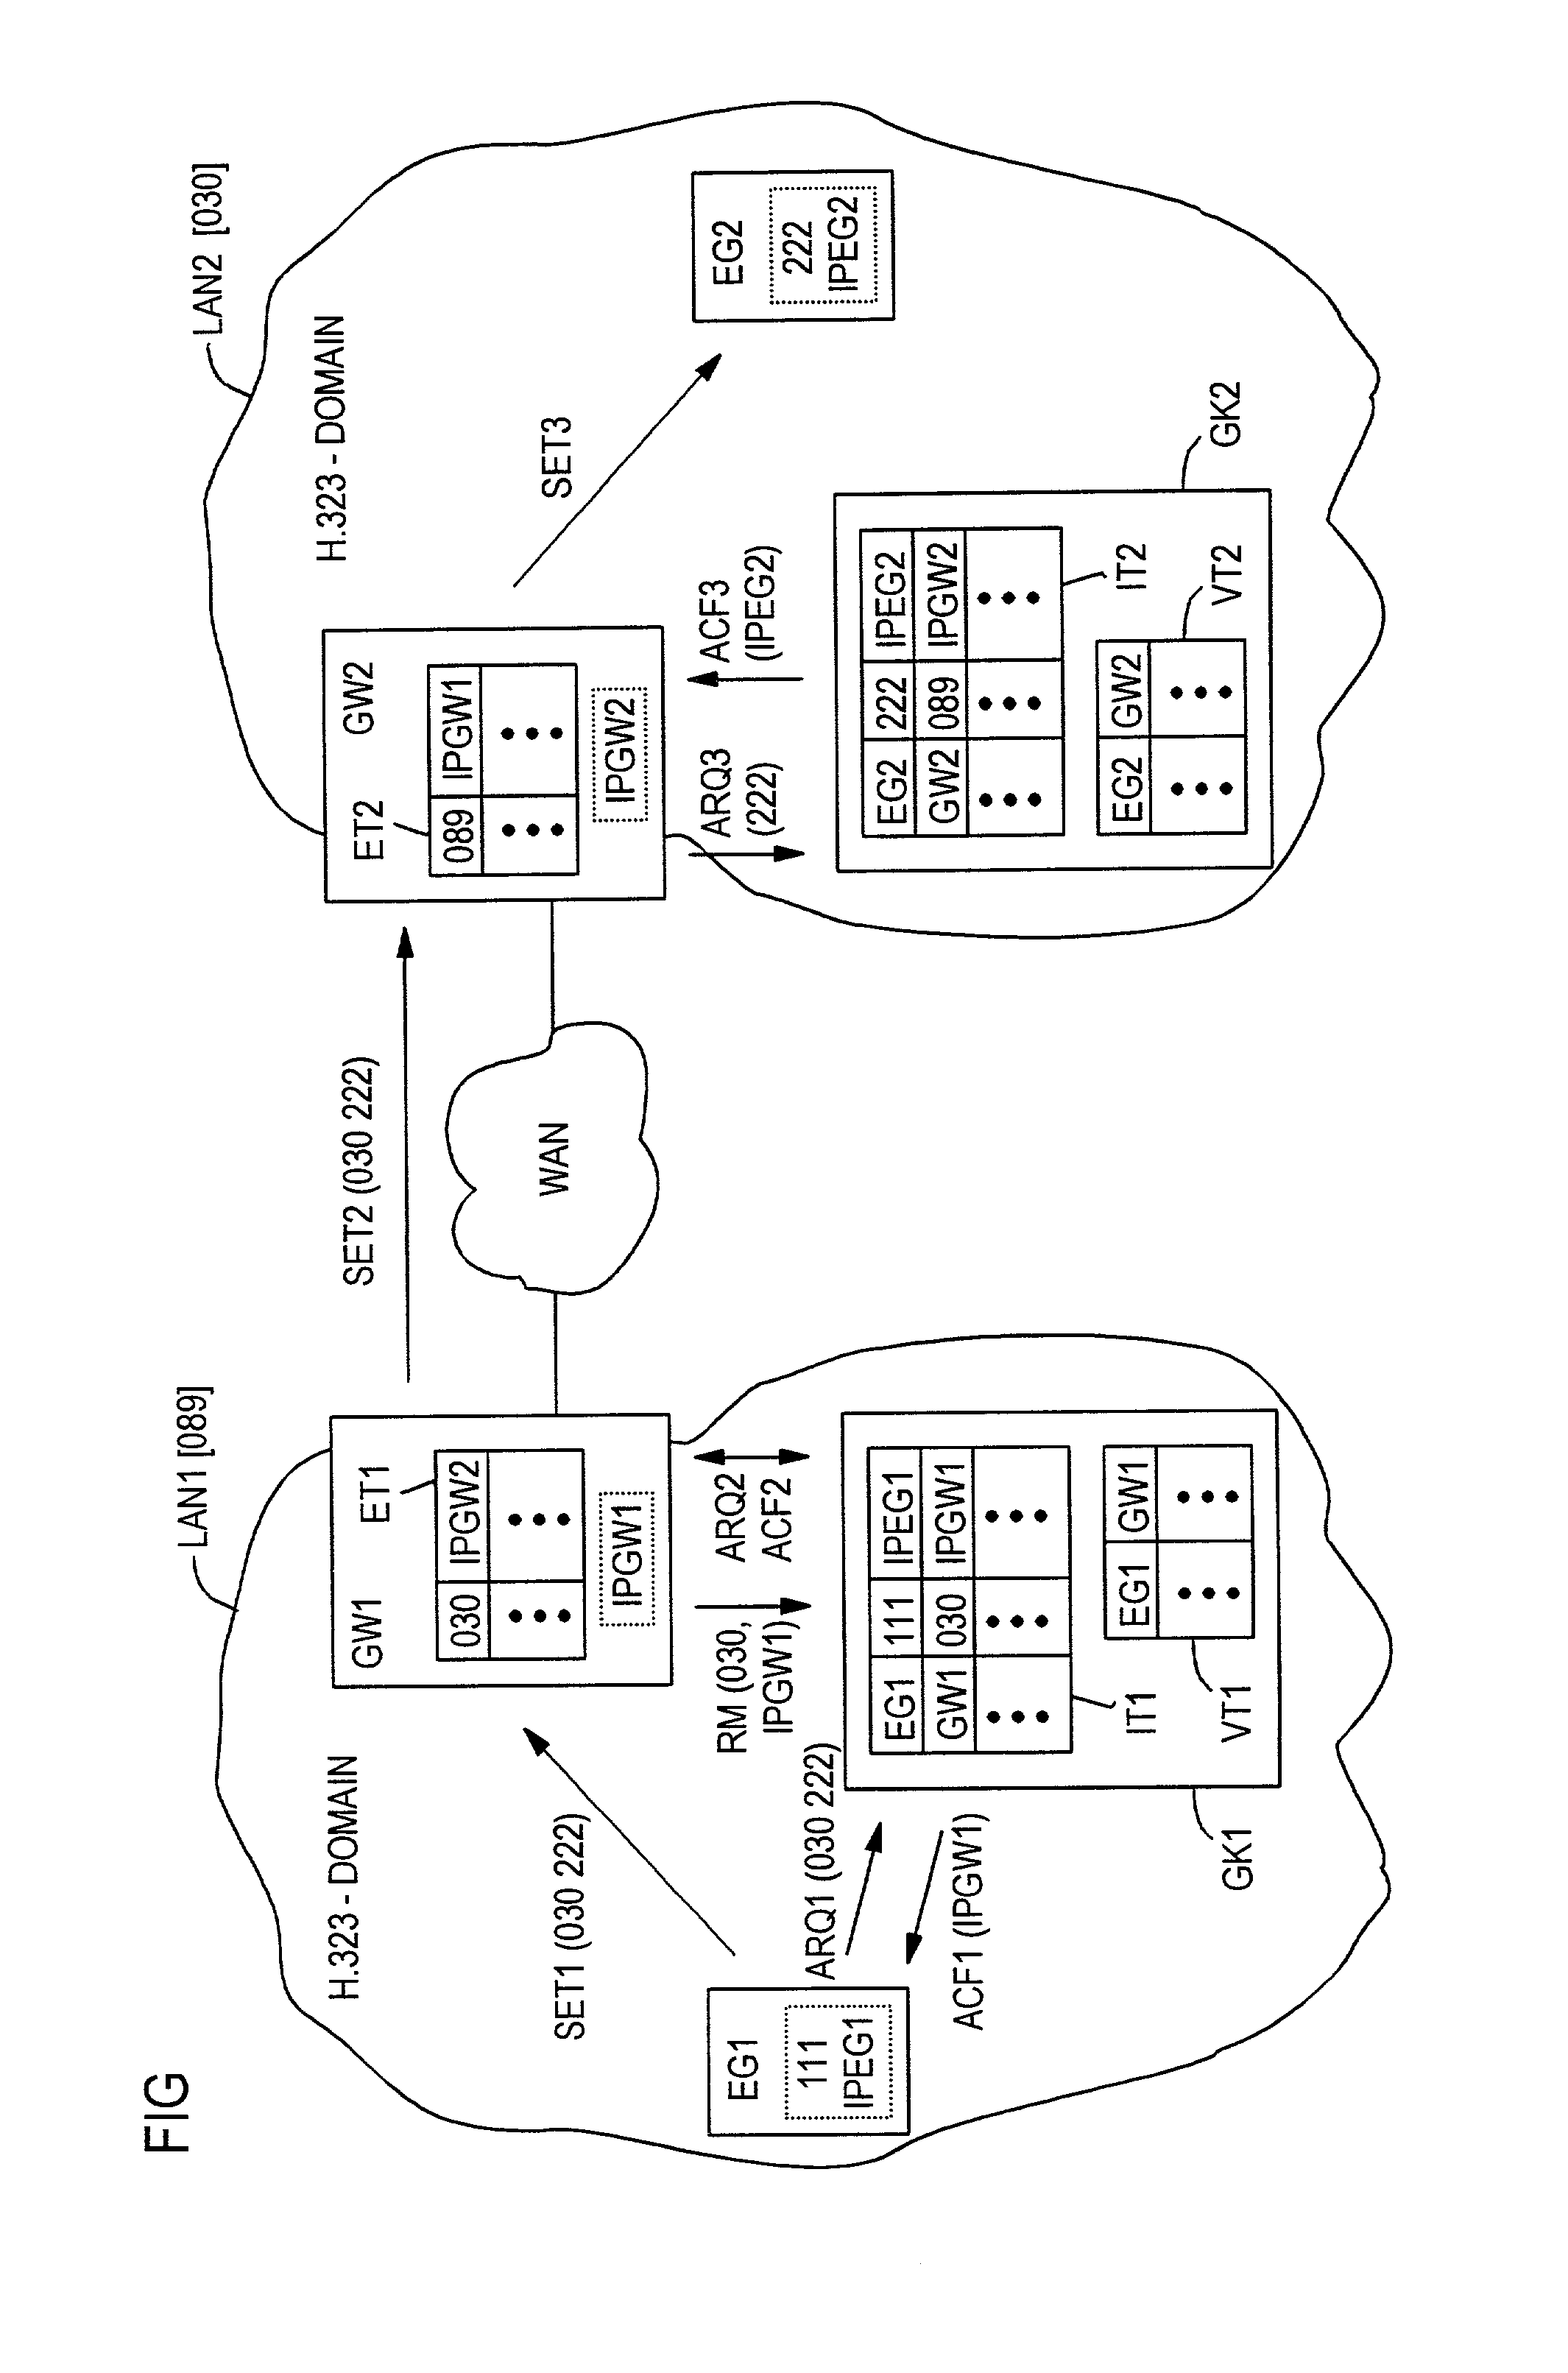 Method for establishing a connection from a terminal of a communication network to a network-external connection destination, and associated apparatus and network